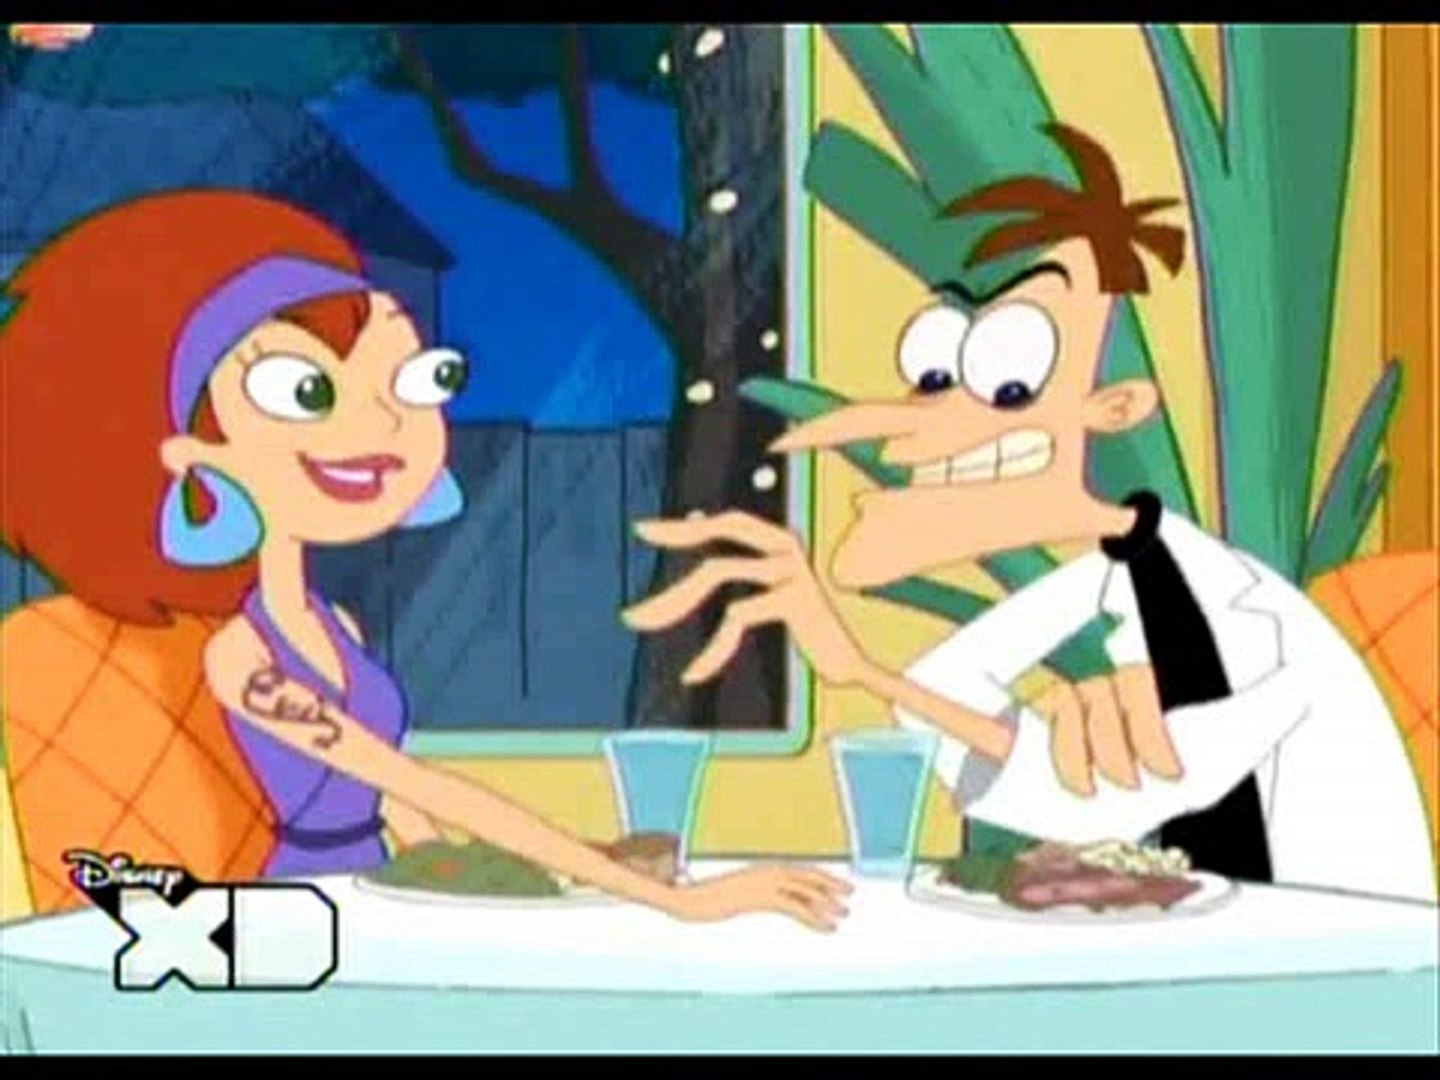 Evil Love from Phineas And Ferb (Episode: Chez Platypus)